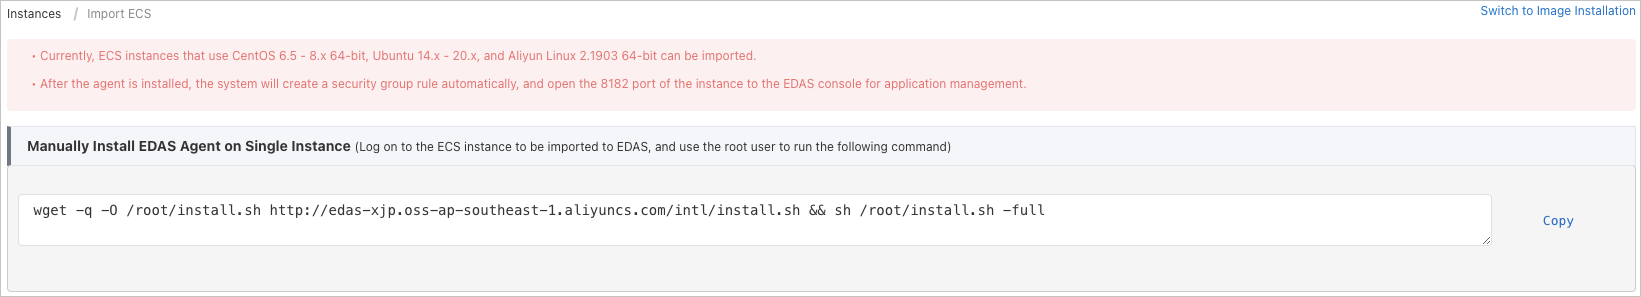 Import an ECS instance by using a command script